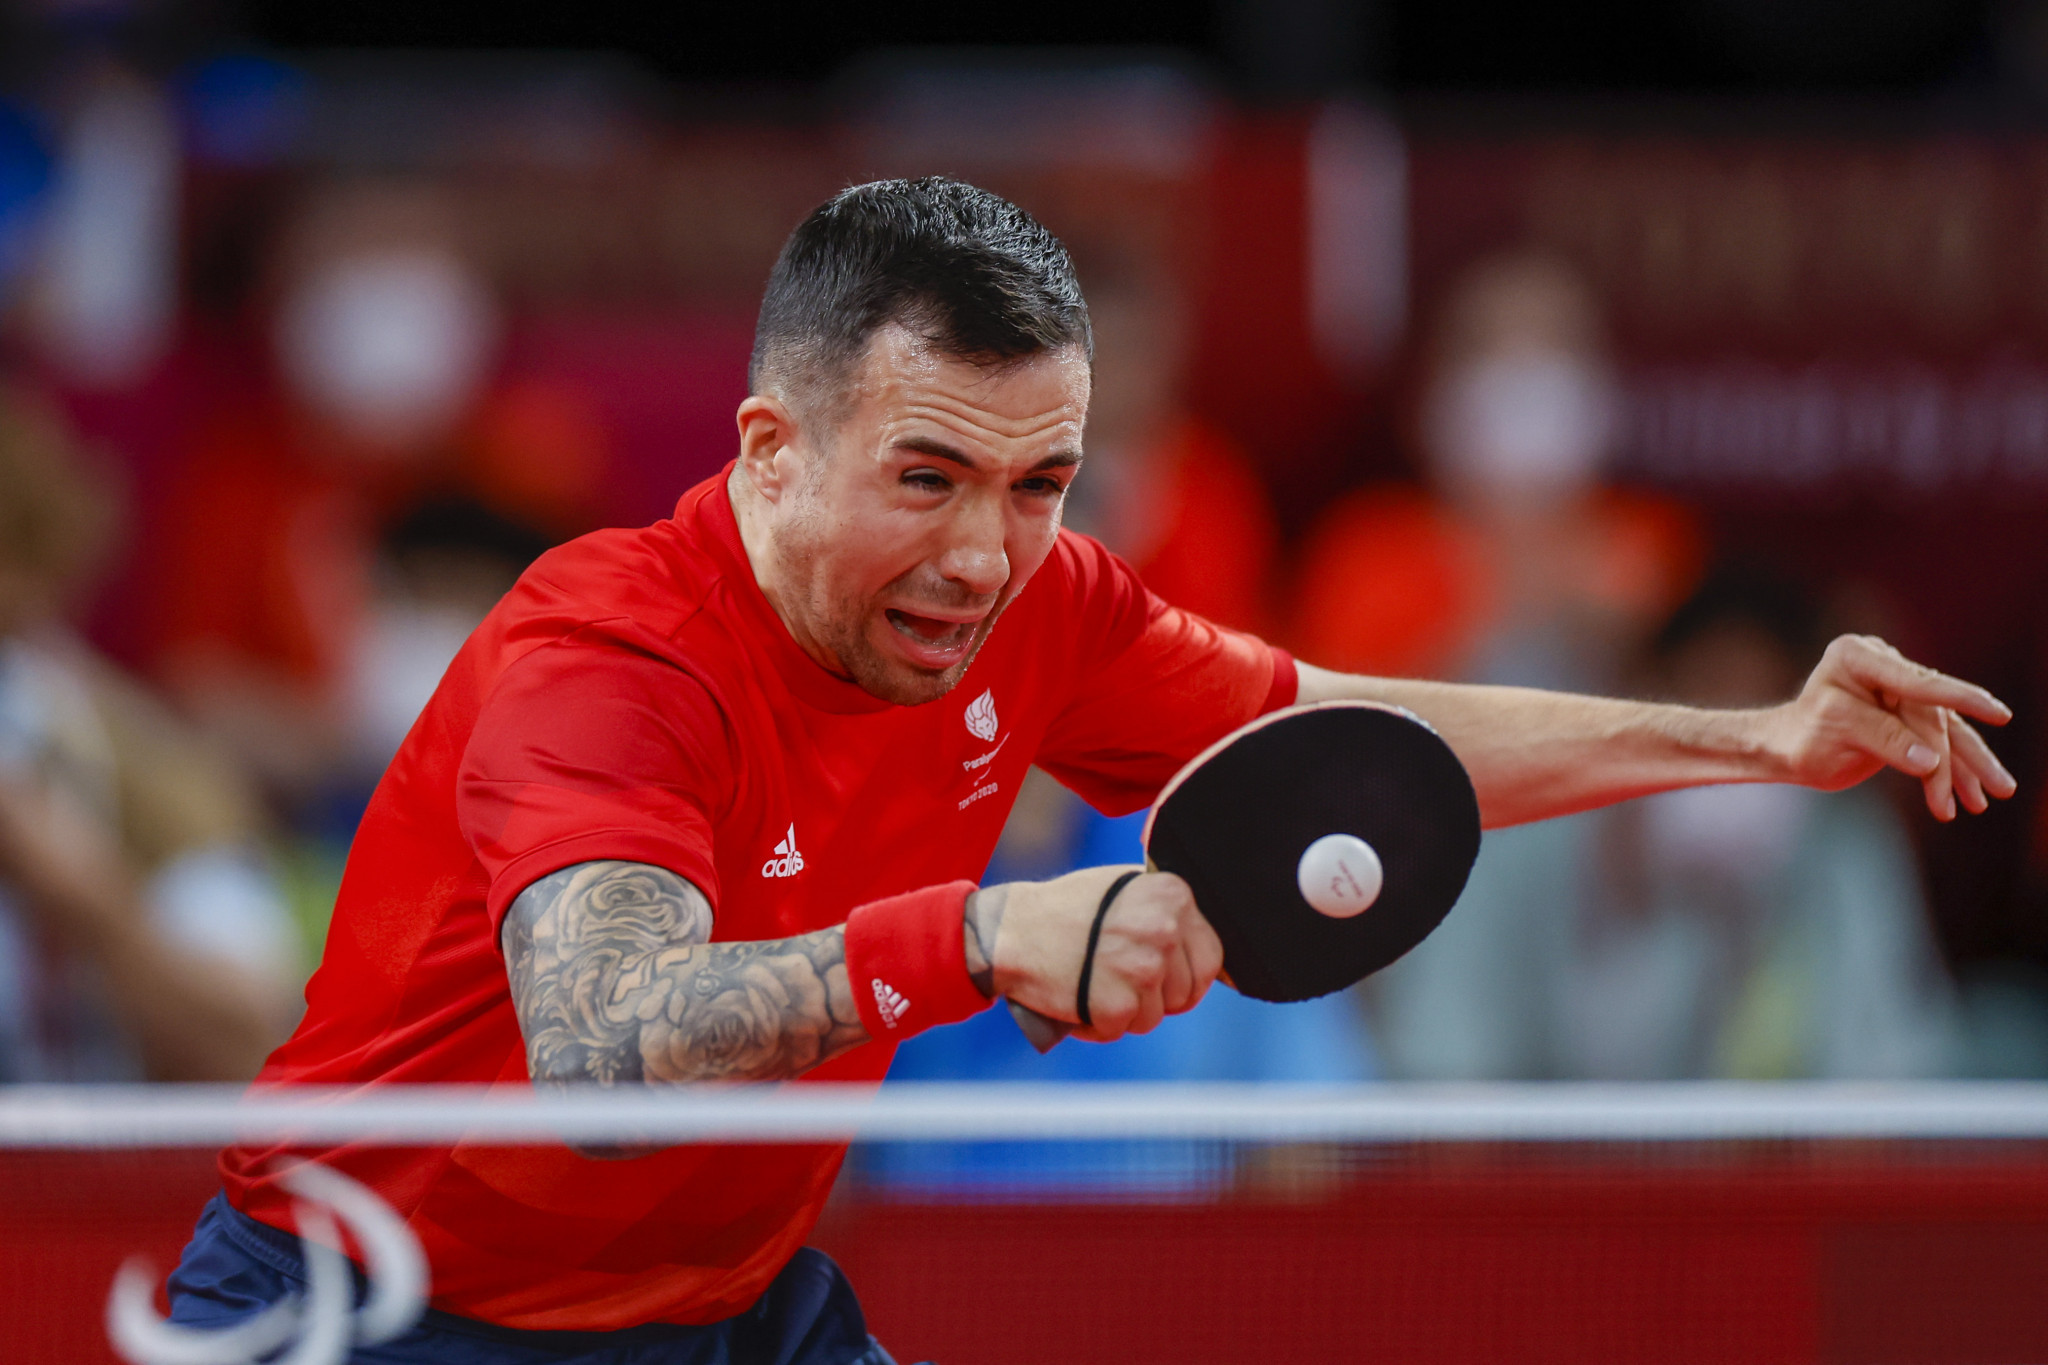 Four-time Paralympic medallist Will Bayley is among Britain's Para table tennis success stories with Gorazd Vecko as BPTT performance director ©Getty Images